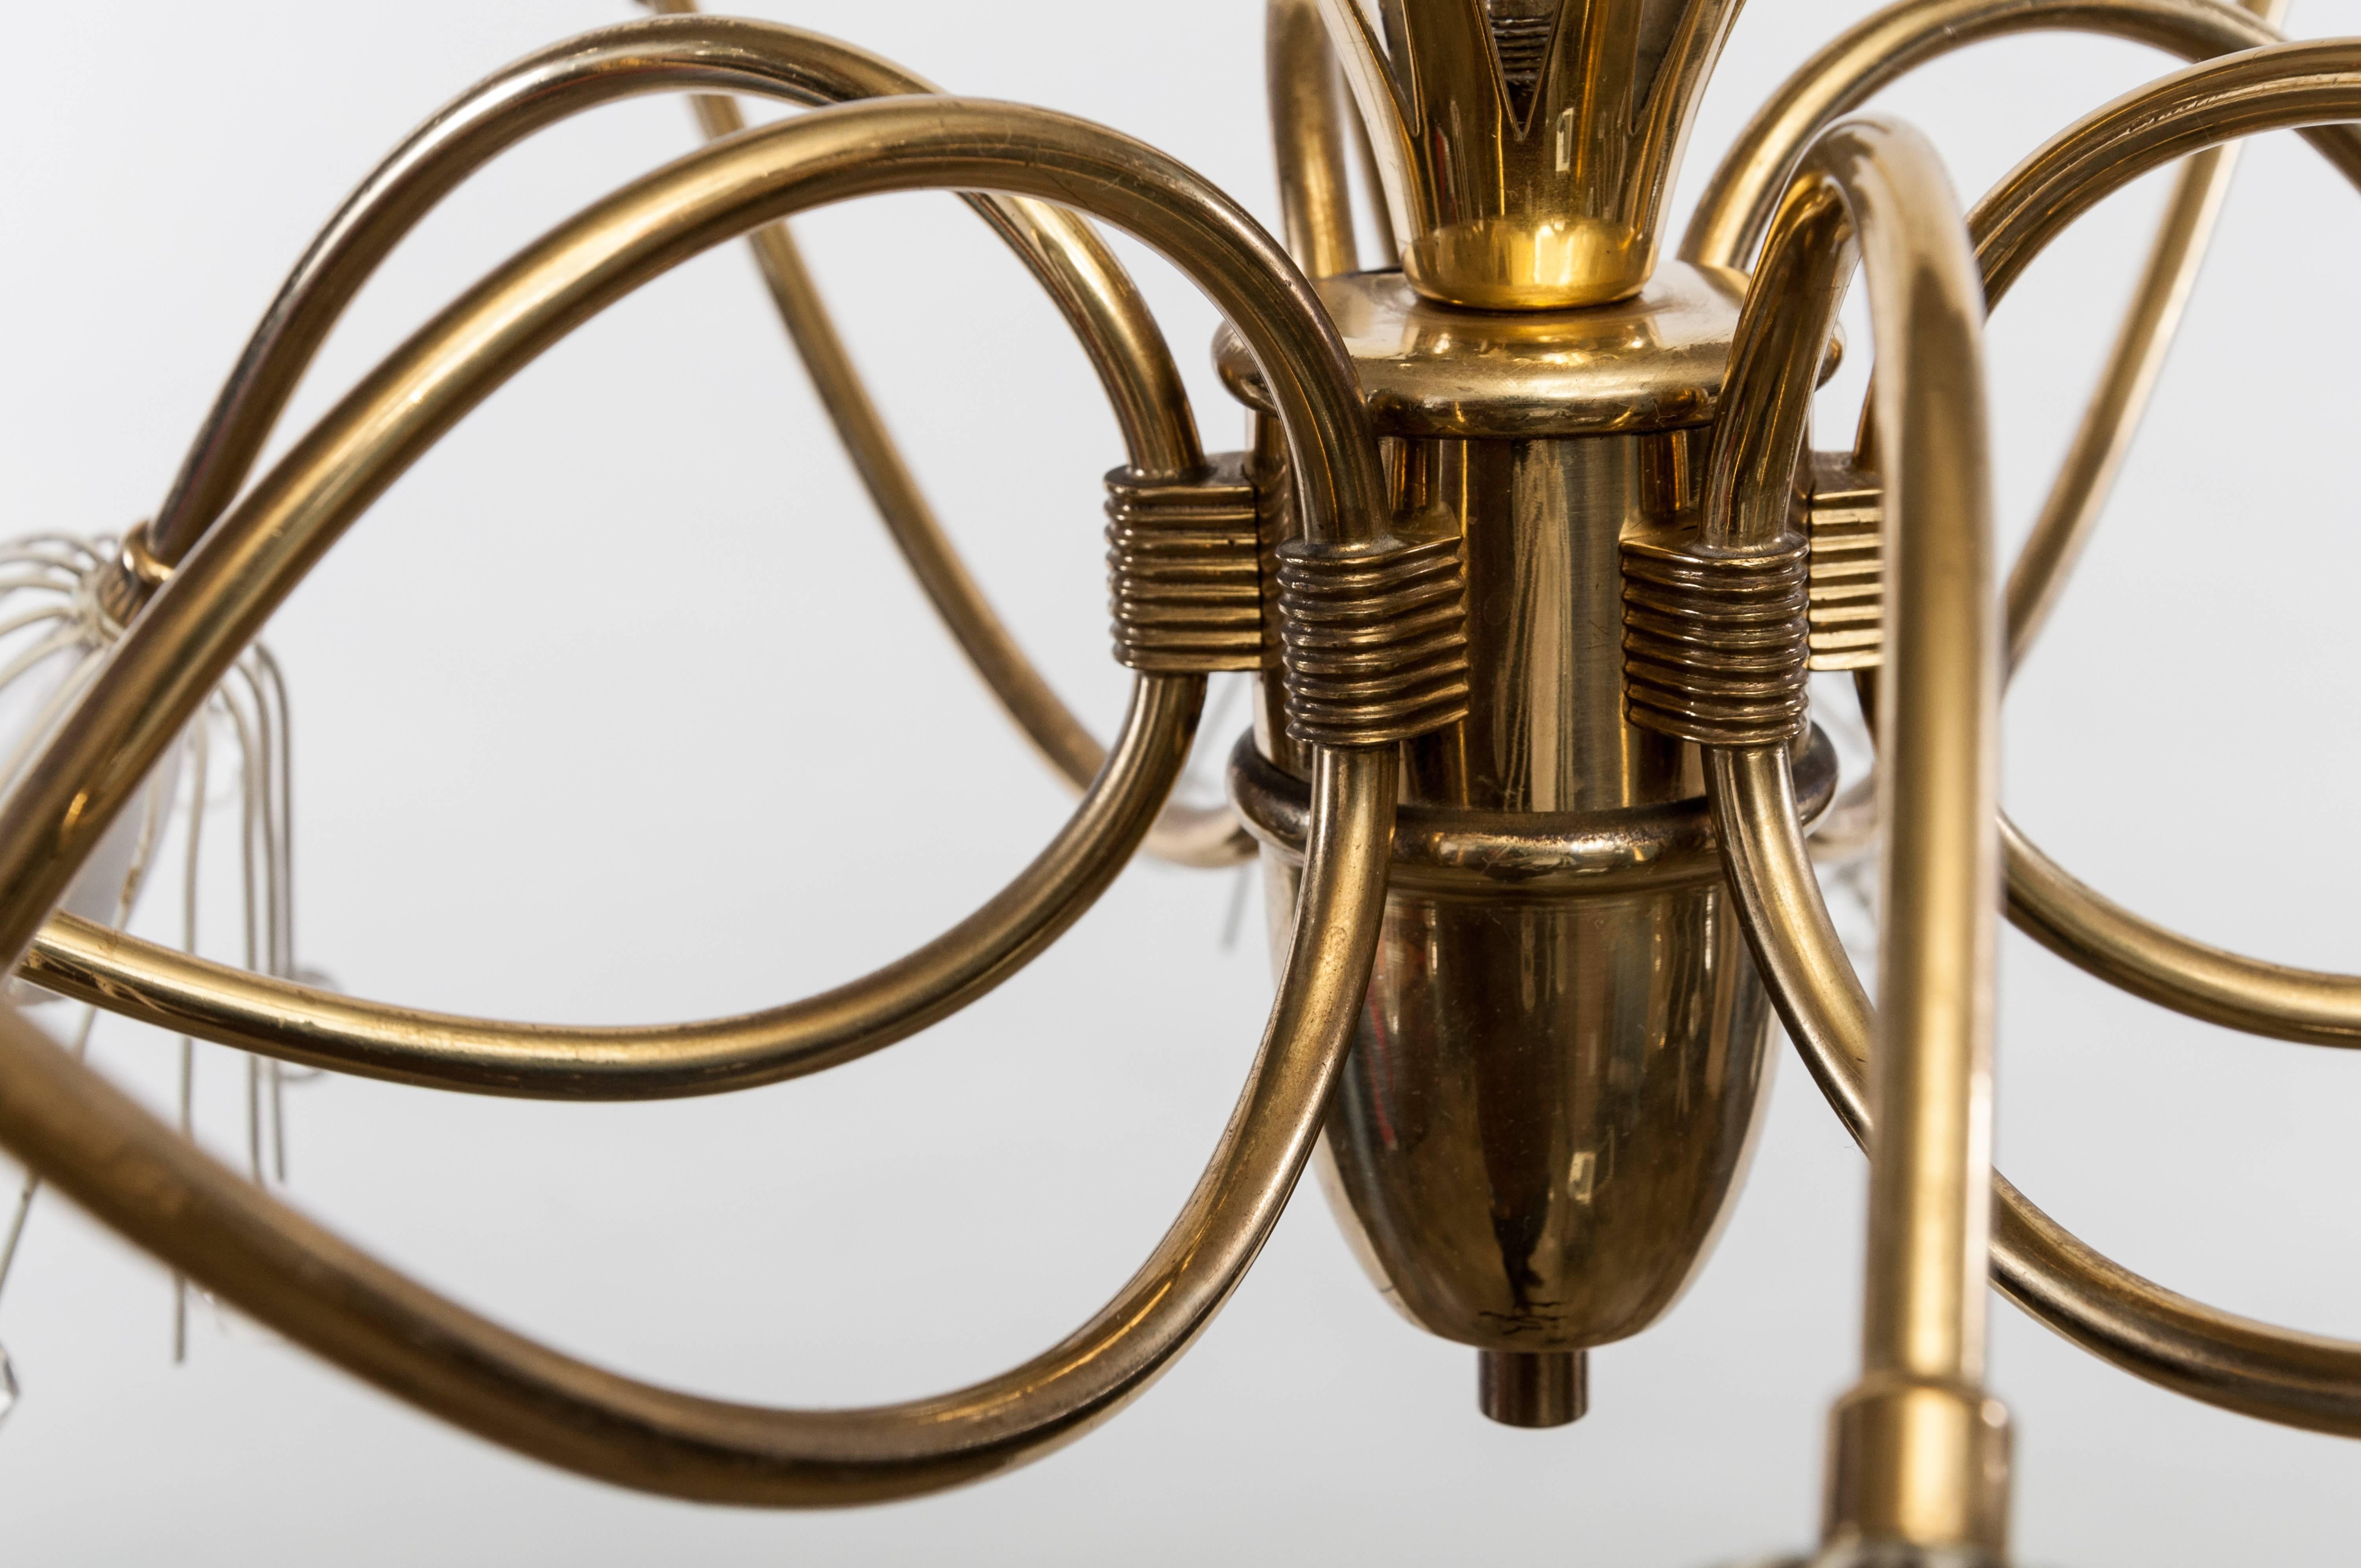 Midcentury Brass Lamp Designed by Emil Stejnar and Manufactured by Rupert Nikoll im Angebot 2